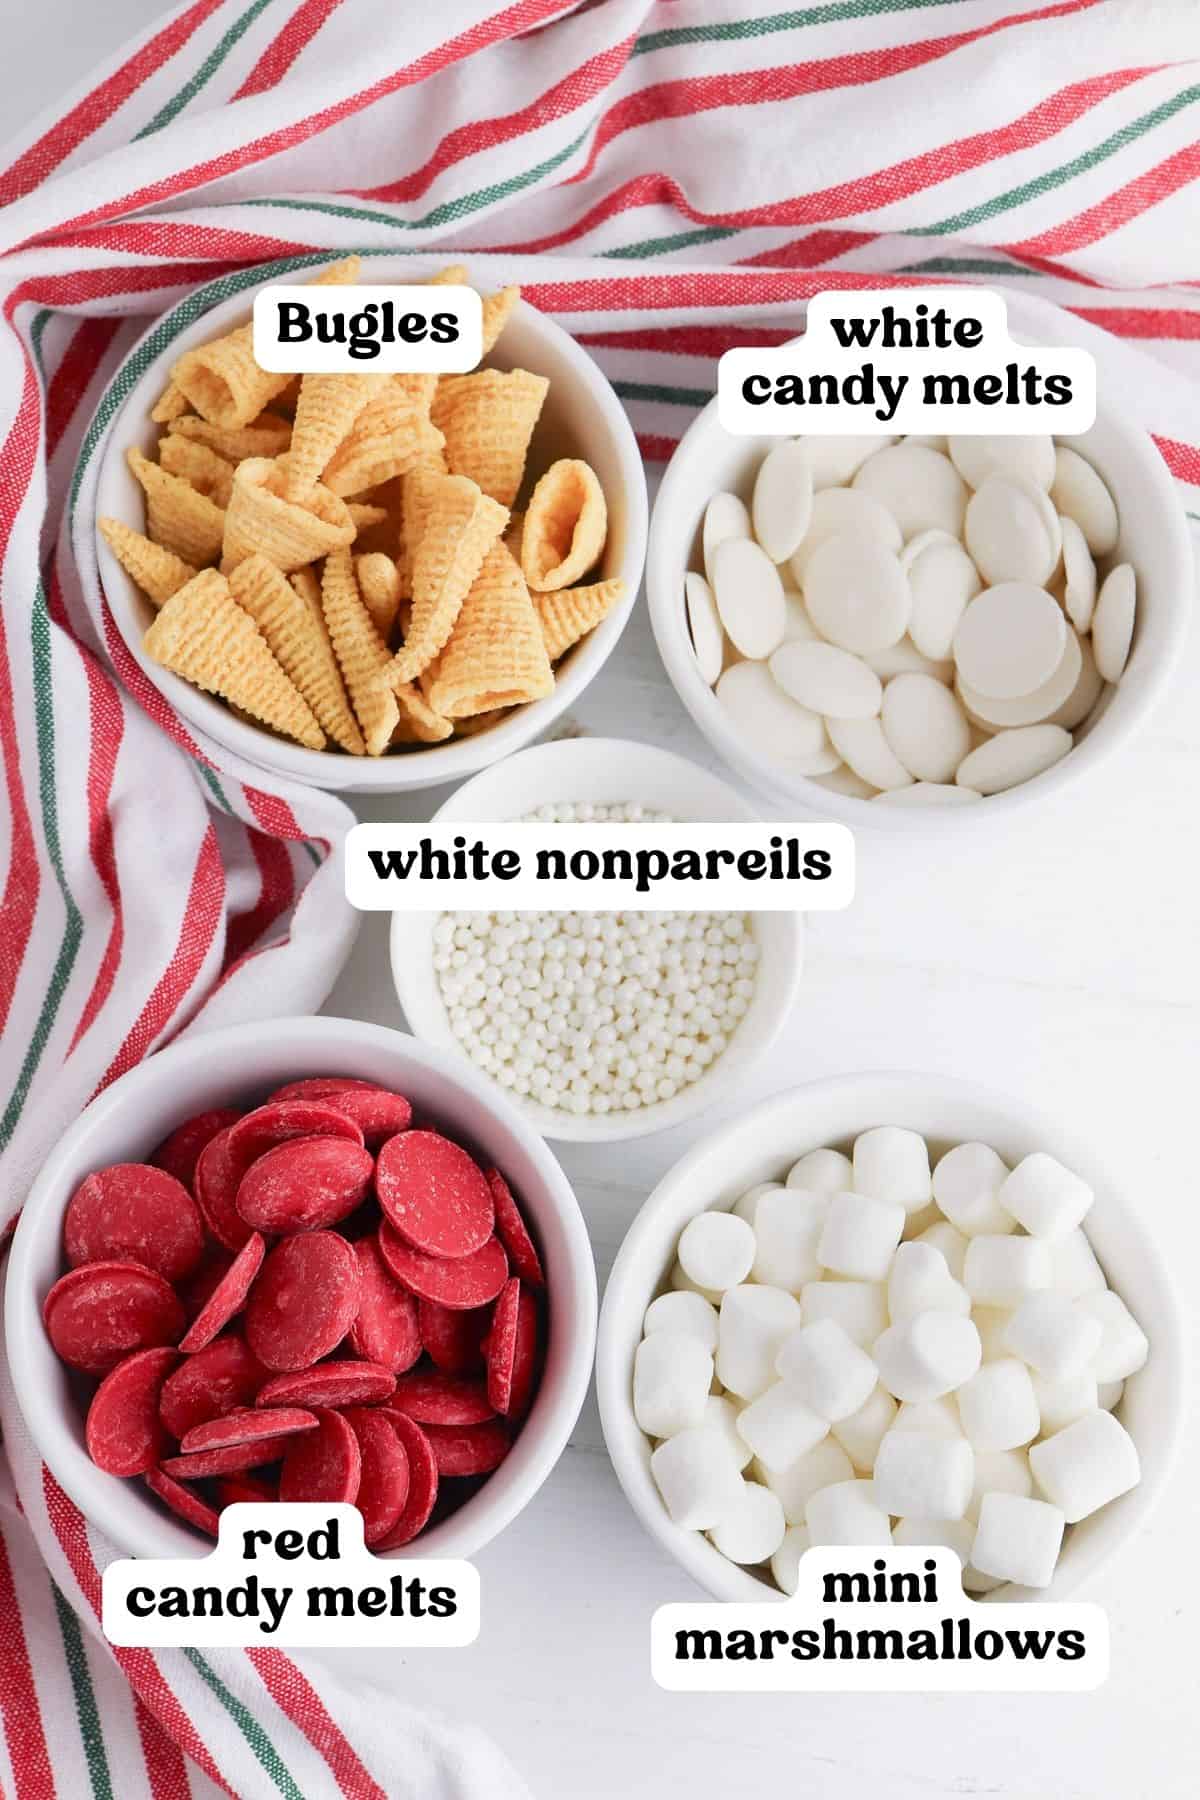 Bugles, white candy melts, red candy melts, white nonpareils, and mini marshmallows.